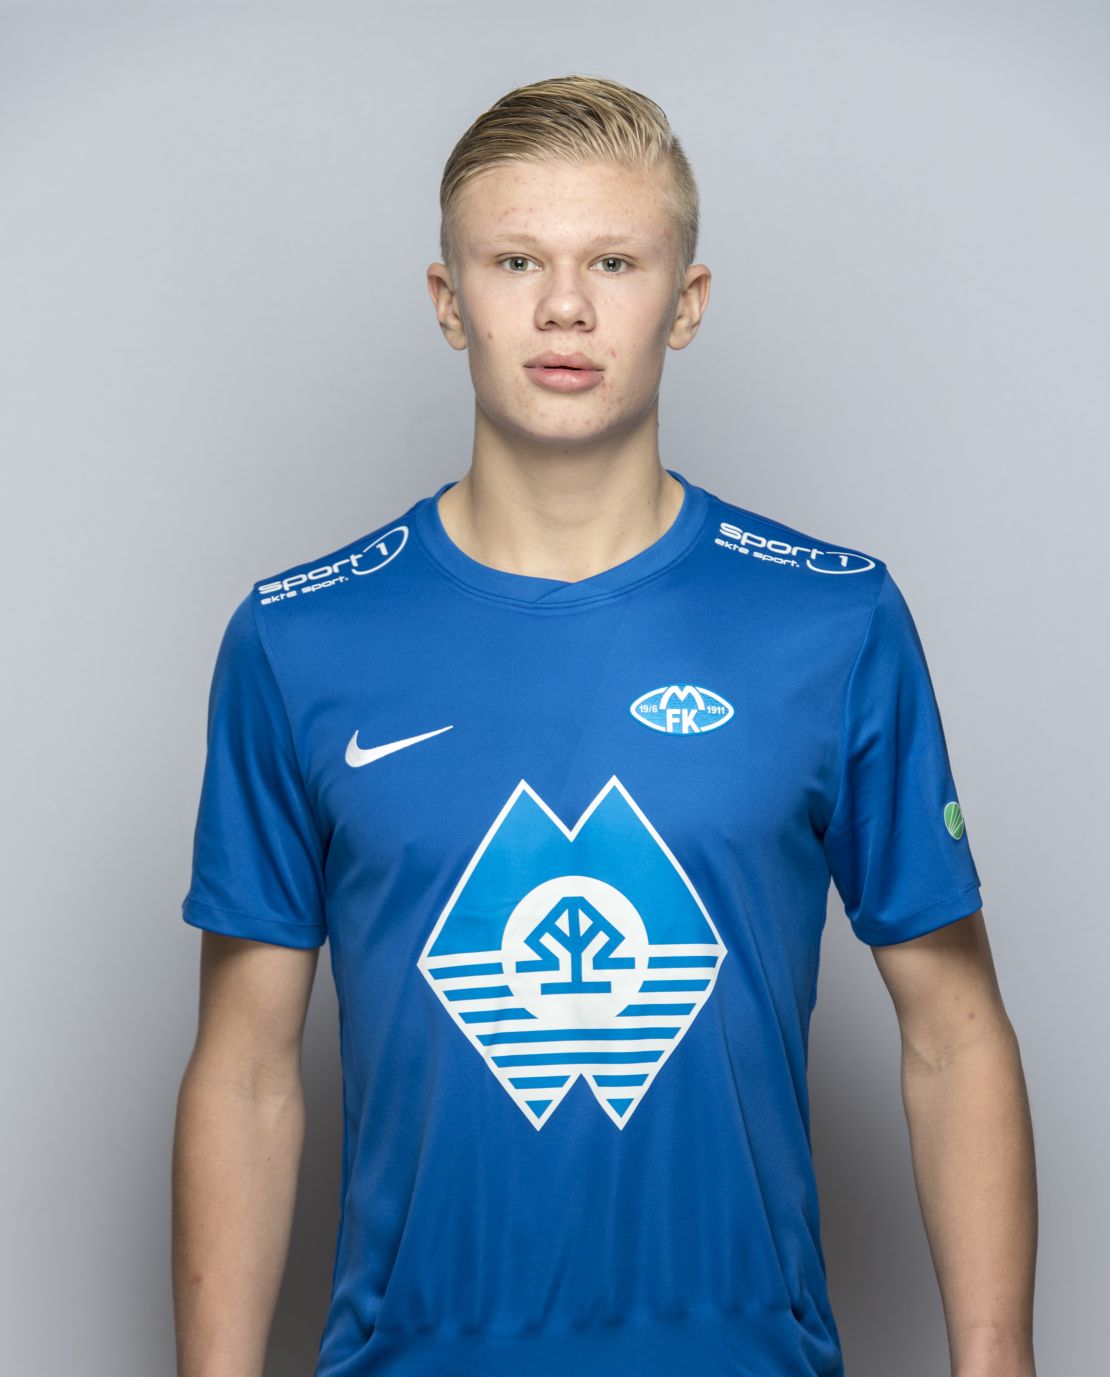 The baby-faced Haaland in his first season at Molde.